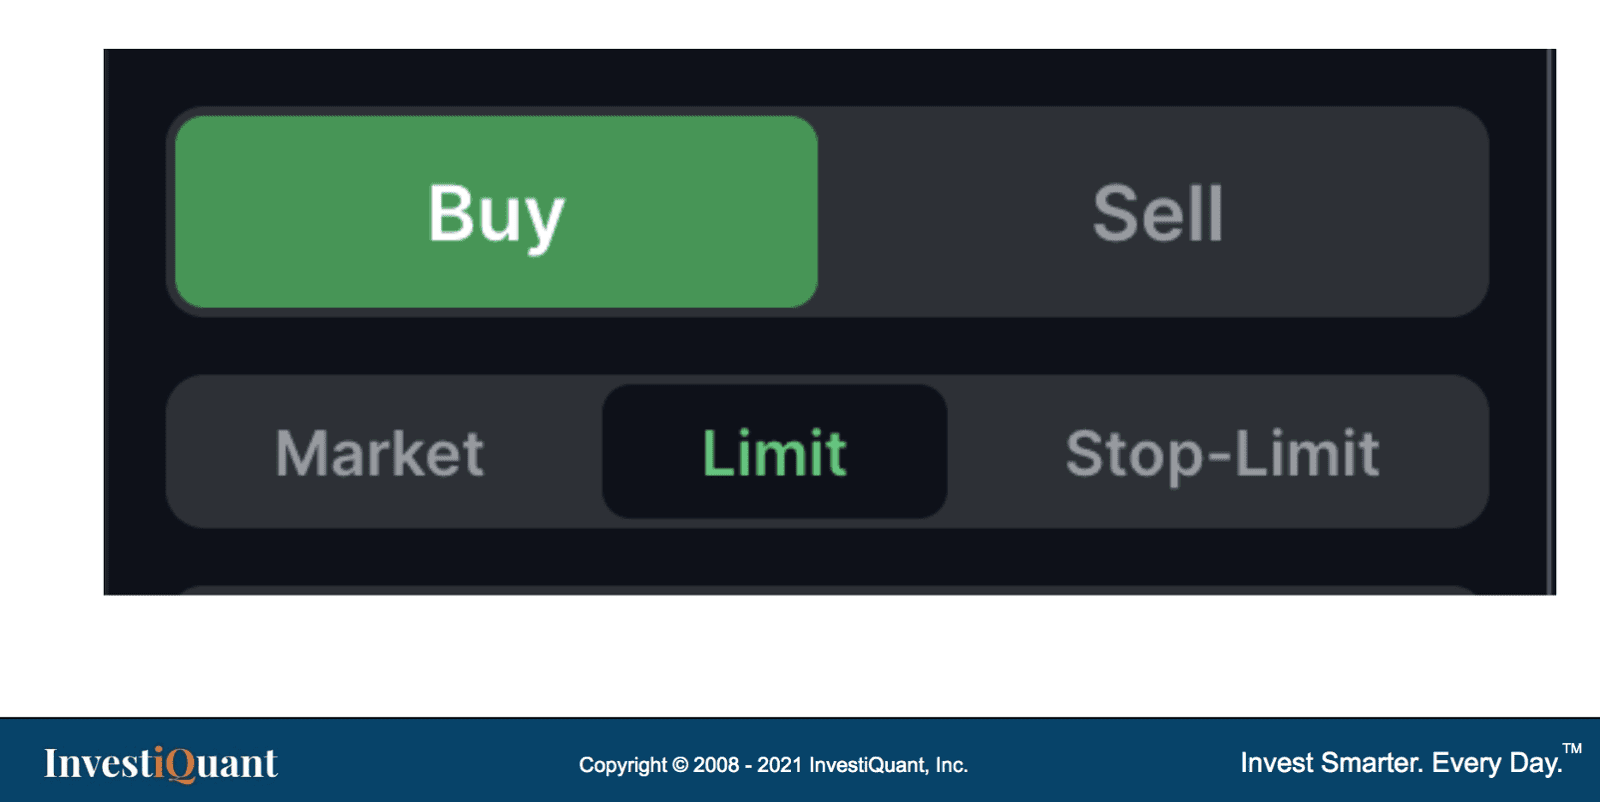 Limit Orders